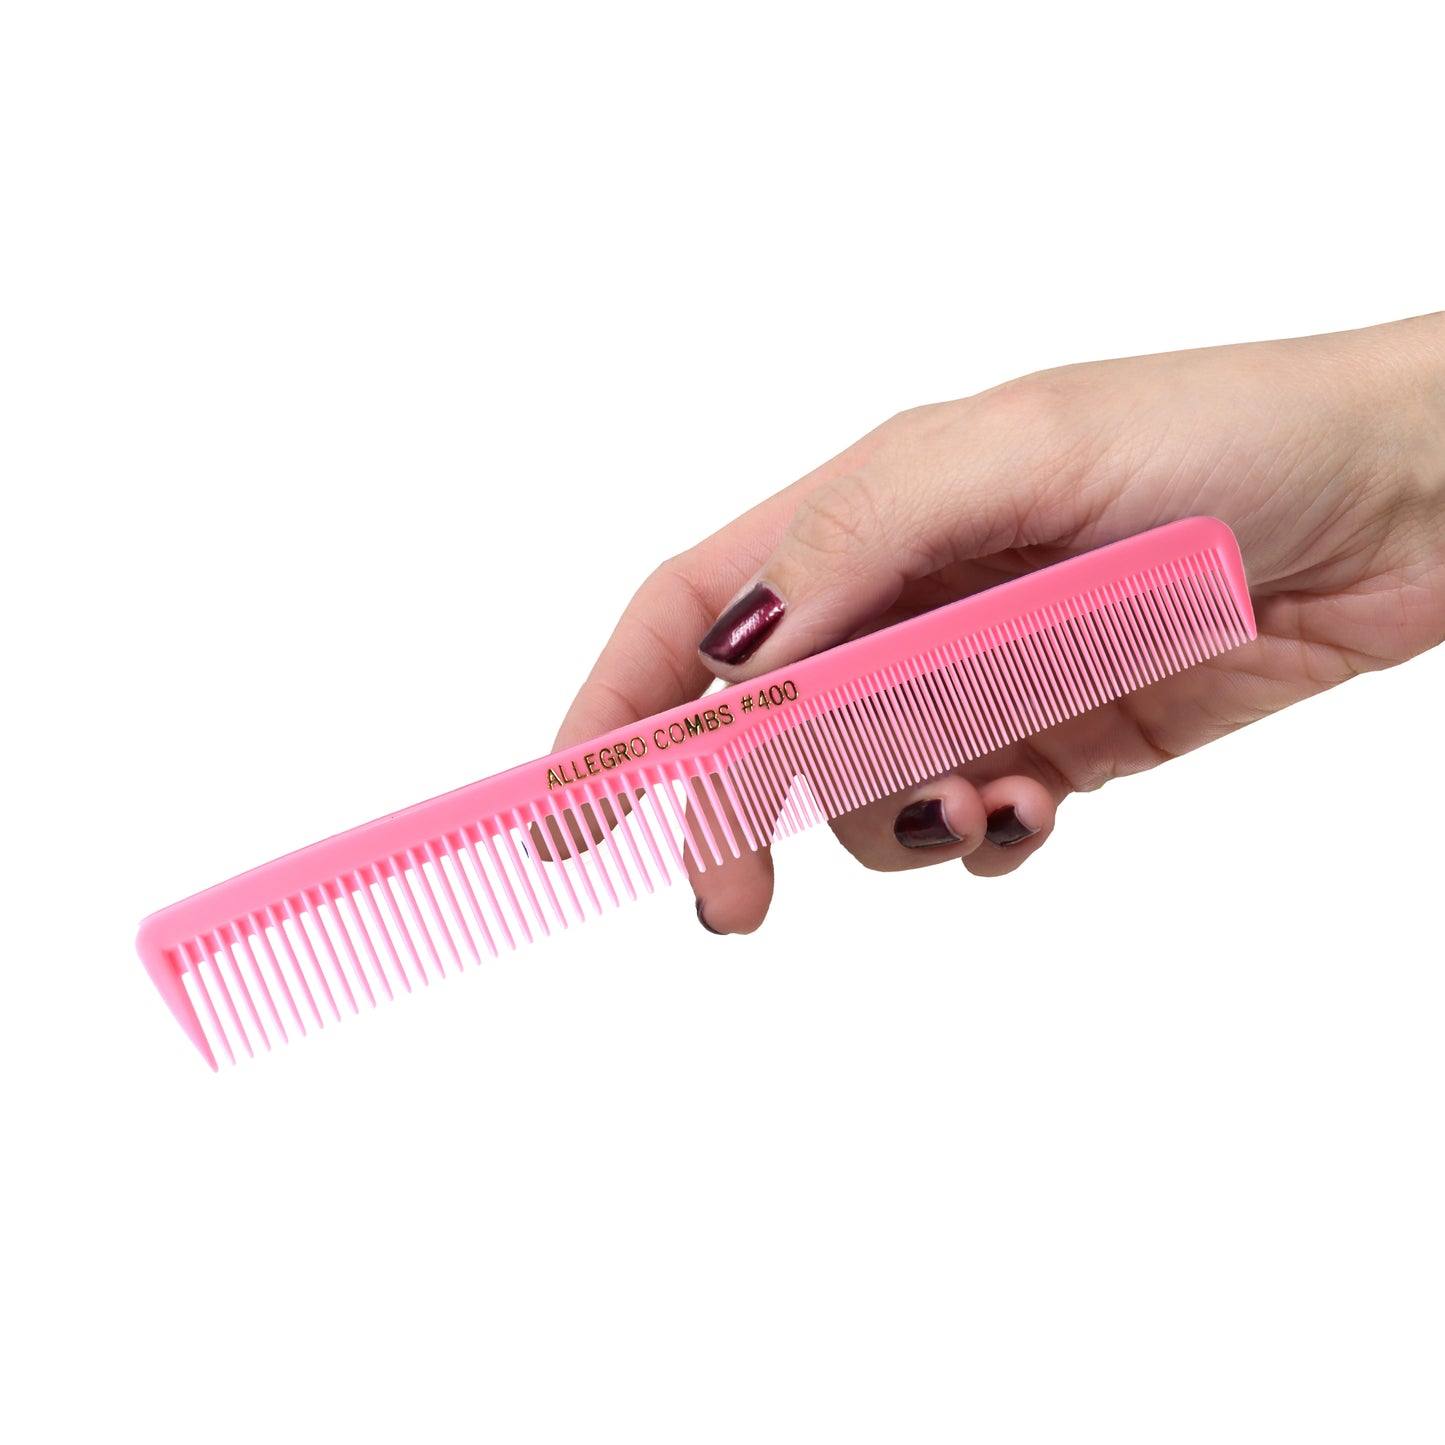 Allegro Combs 400 Barbers Combs Cutting Combs All Purpose Combs. Fresh Pink Combs. 12 Pk